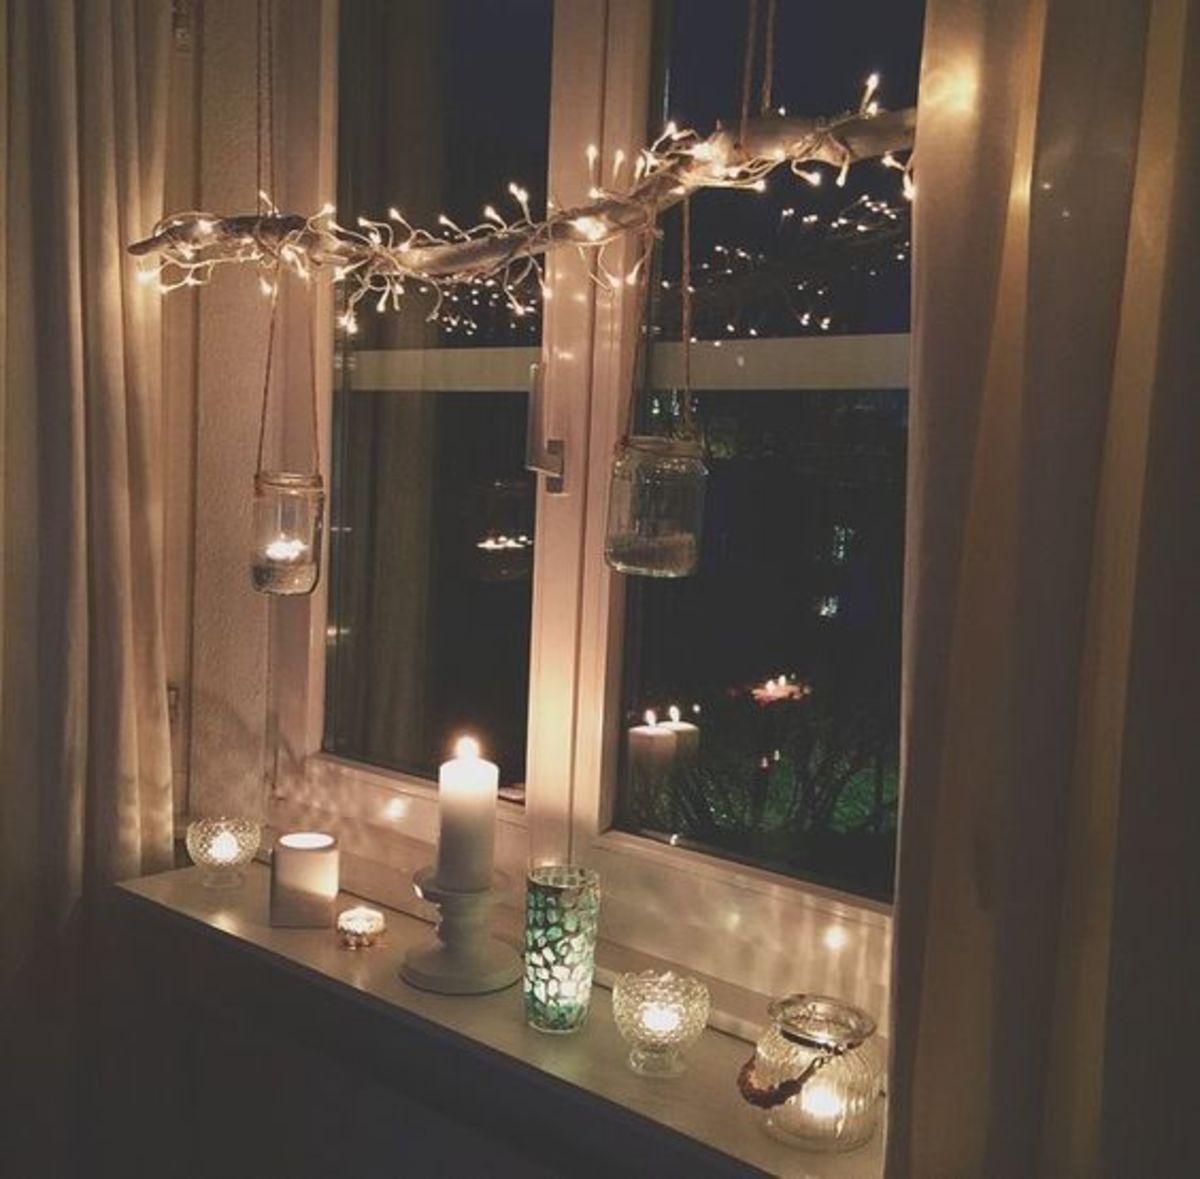 I love the simplicity of this window: Wrap a long branch with white lights, hang it in the window, and place white candles below.